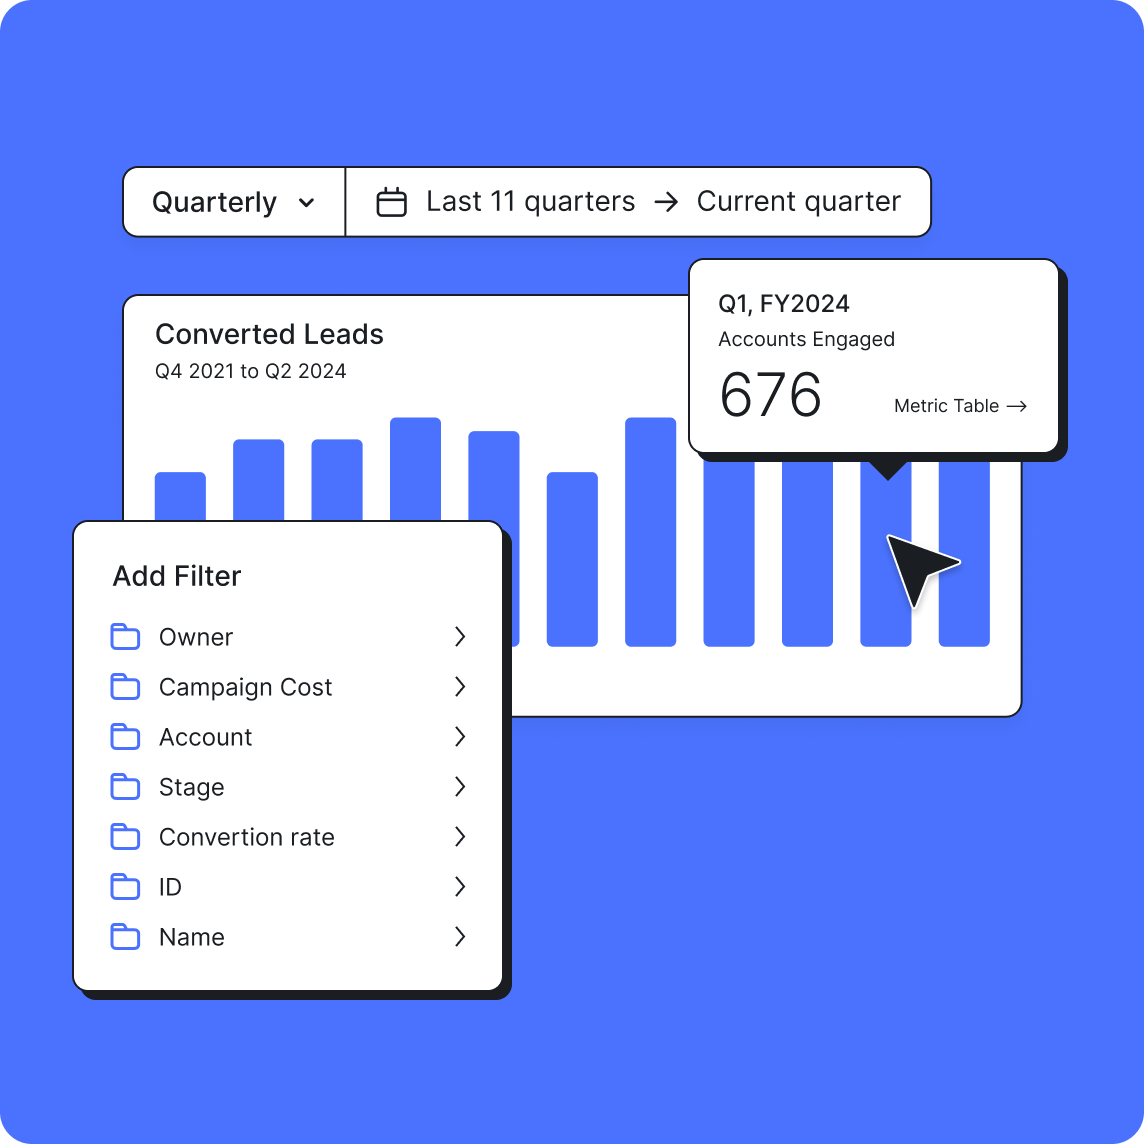 Self-Service Analytics for Business Users